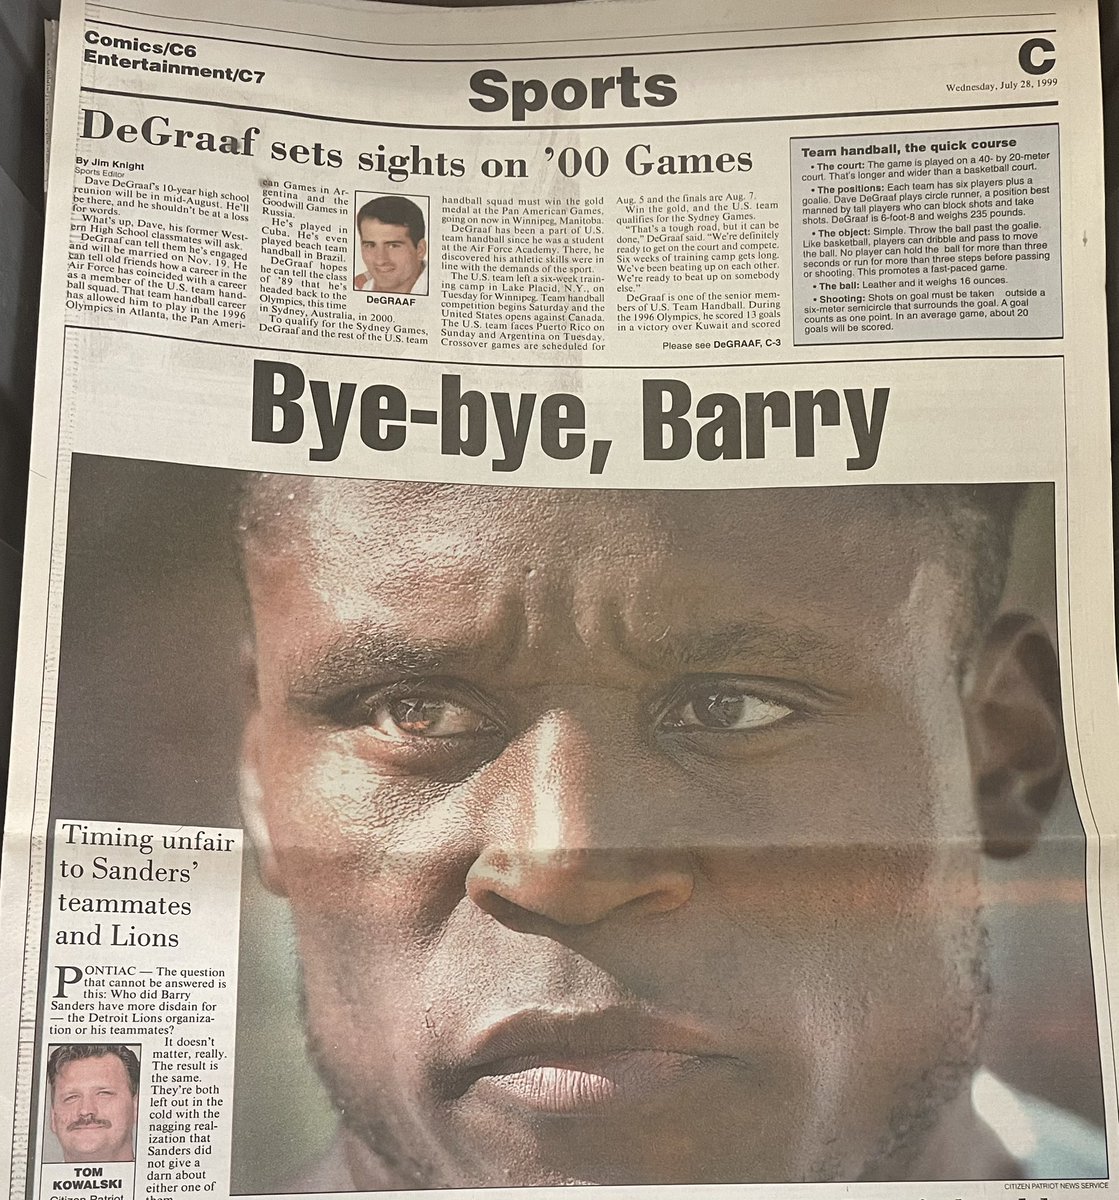 Going thru some stuff at my parents house over Christmas and came across this @BarrySanders .  #ByeByeBarry @jbbernstein